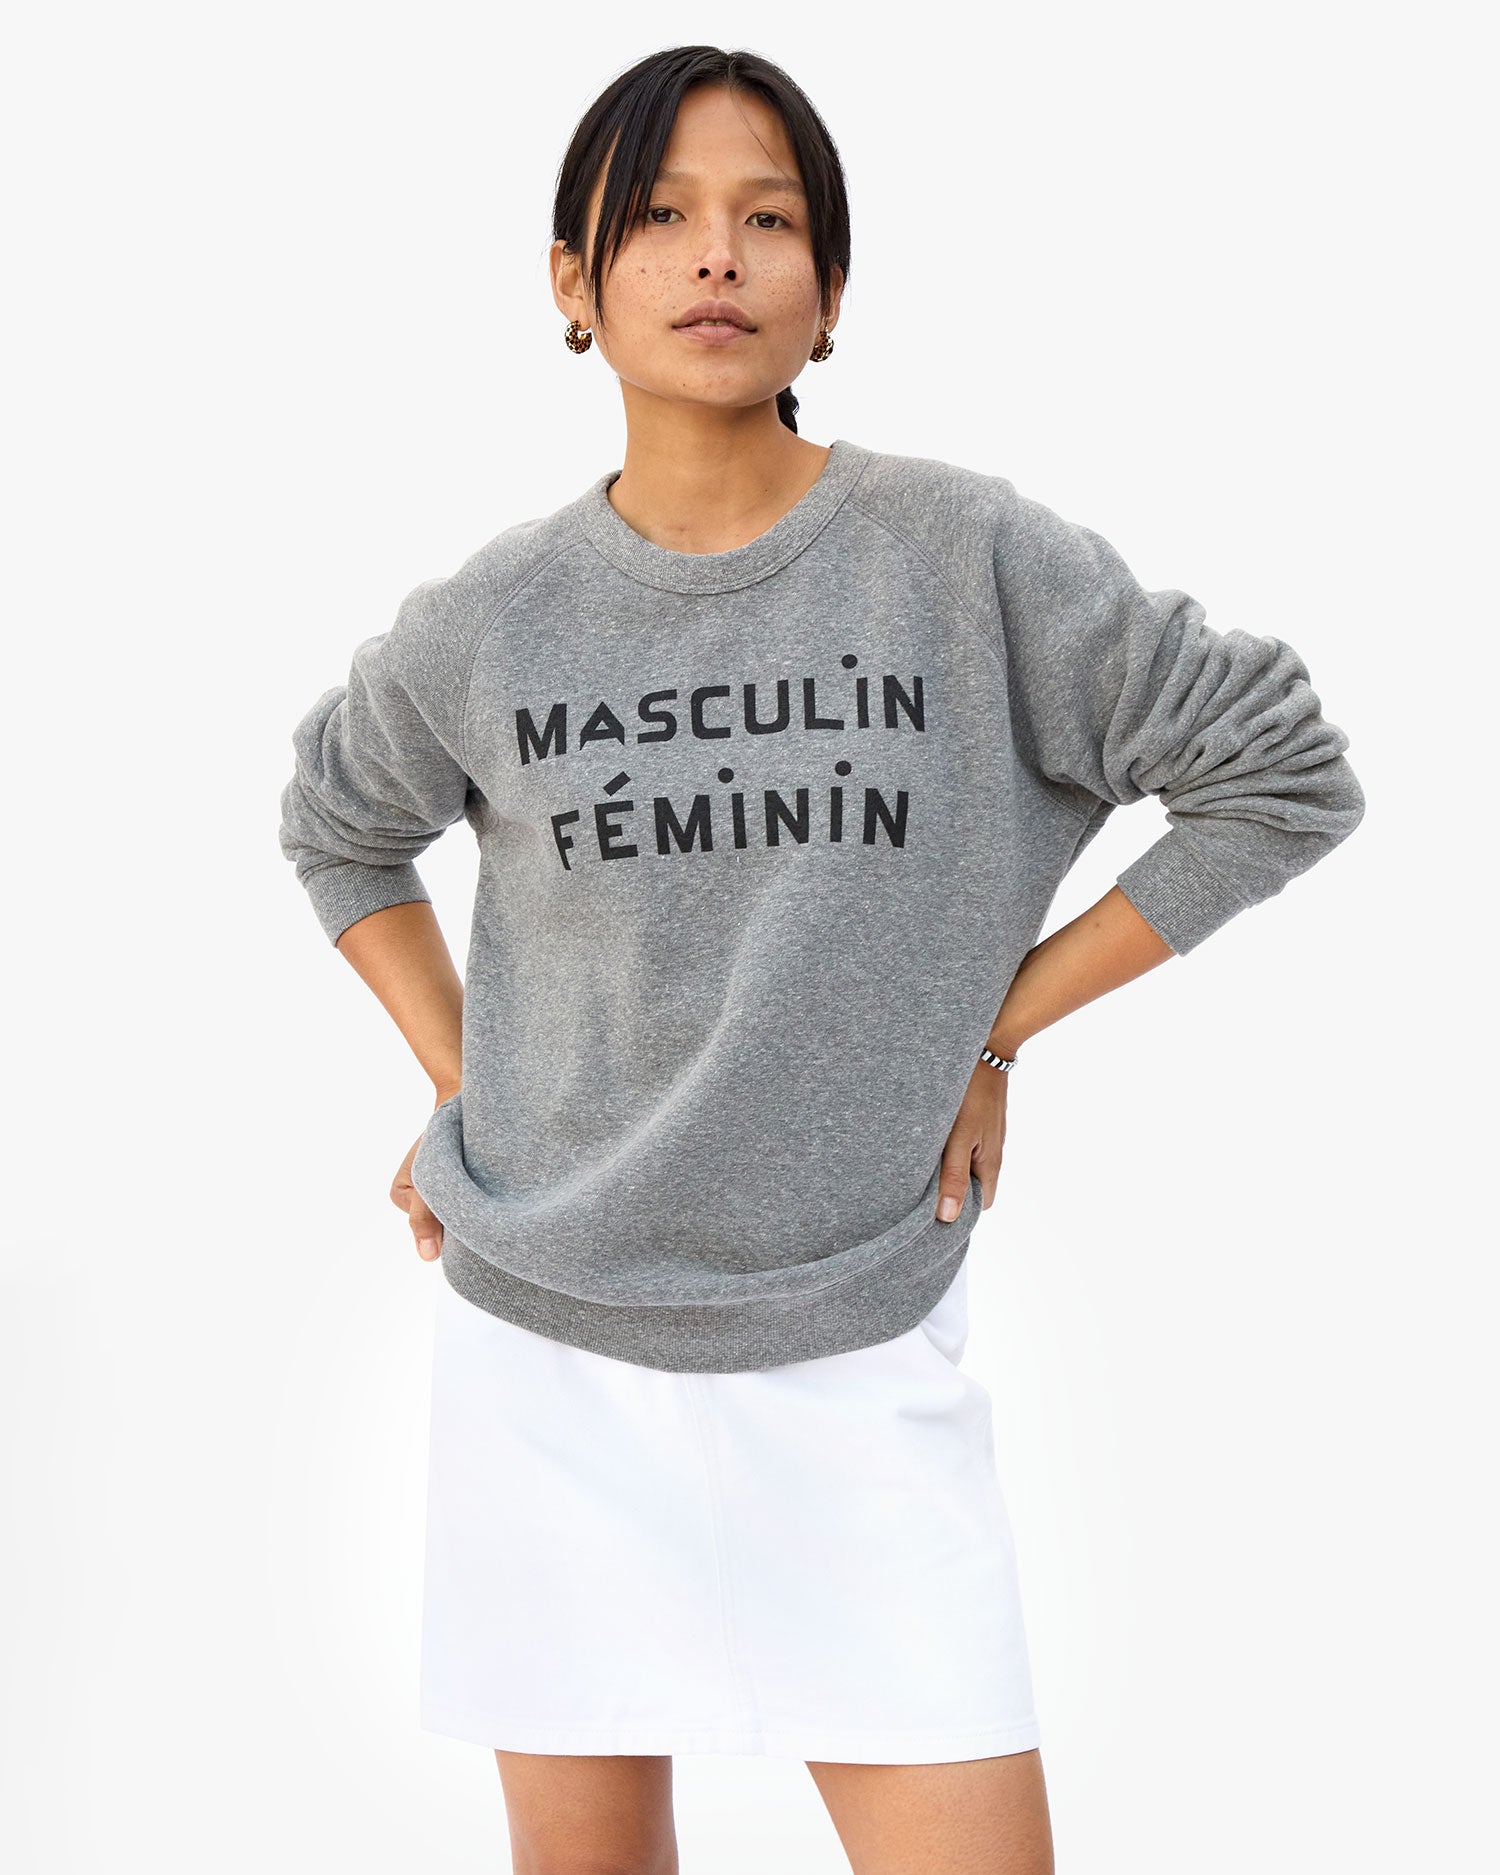 Close Up View of Maly wearing the Masculin Féminin Sweatshirt